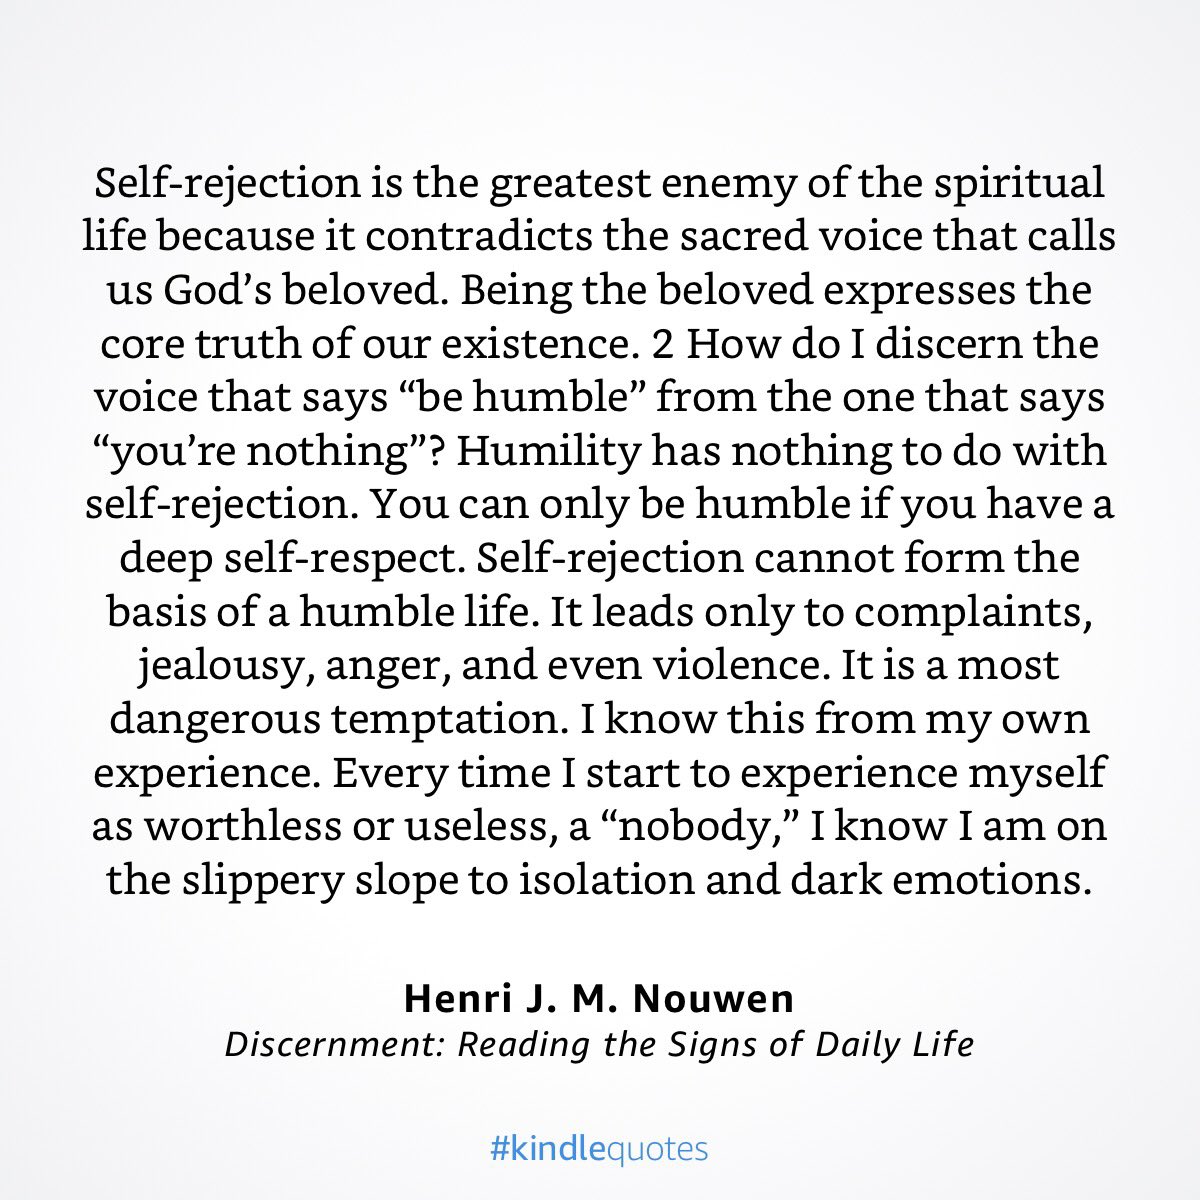 Henri Nouwen describing the difference between humility and self-rejection.

#HenriNouwen #Humility #Discernment